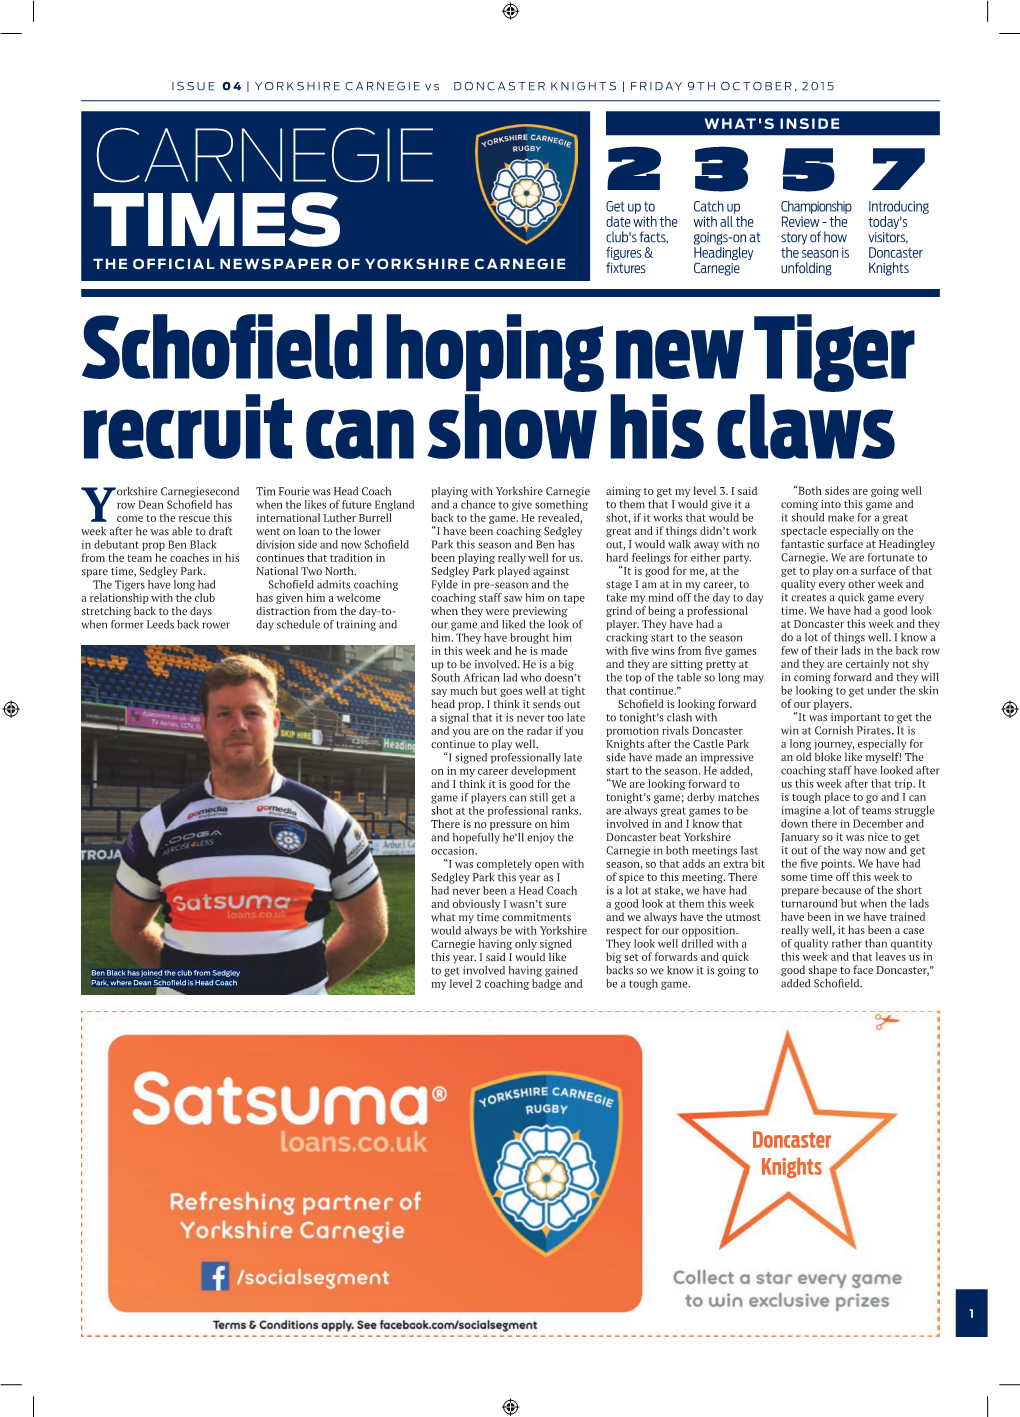 Schofield Hoping New Tiger Recruit Can Show His Claws